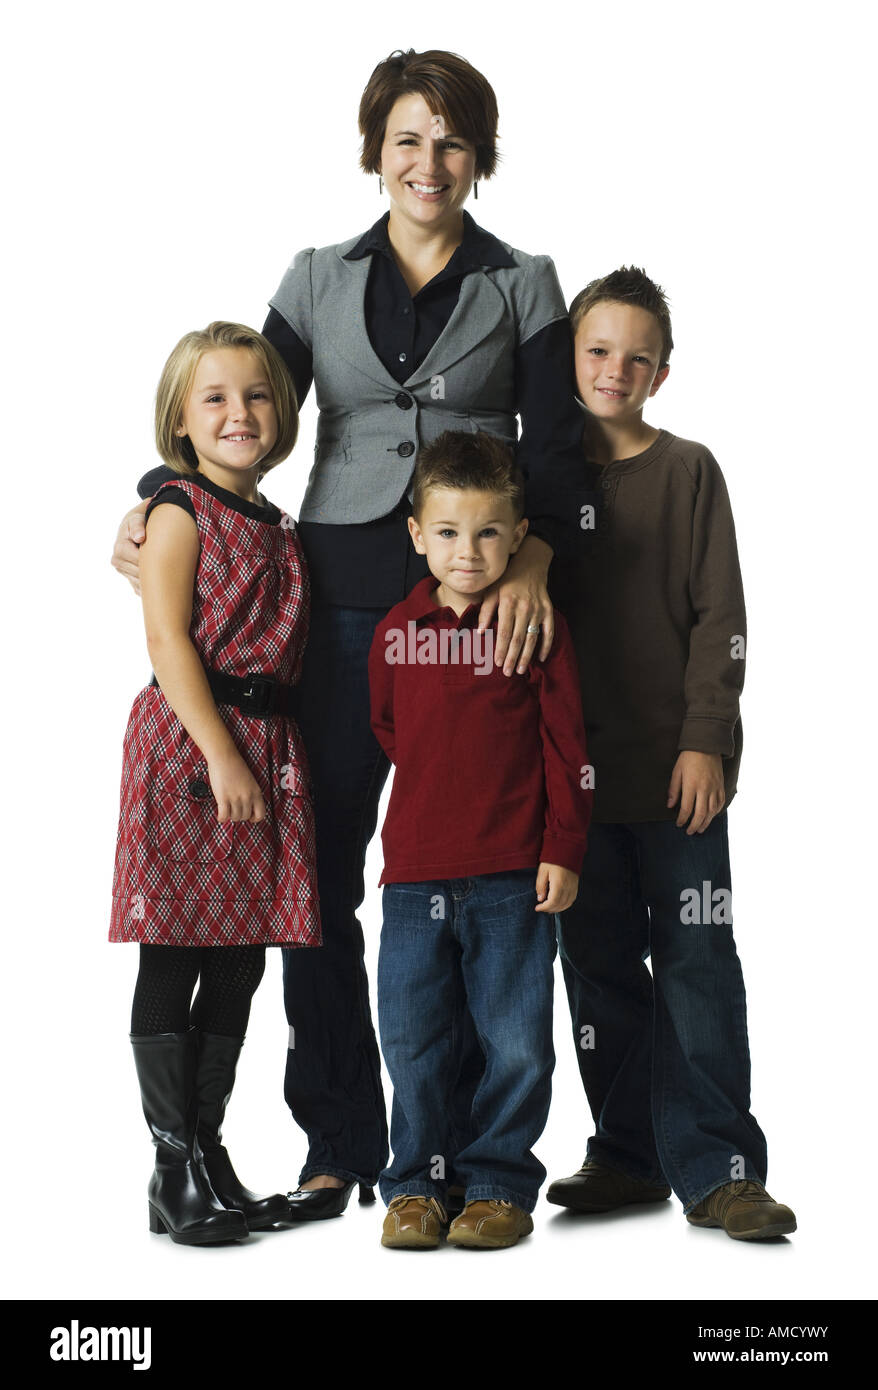 Woman with three children smiling Stock Photo